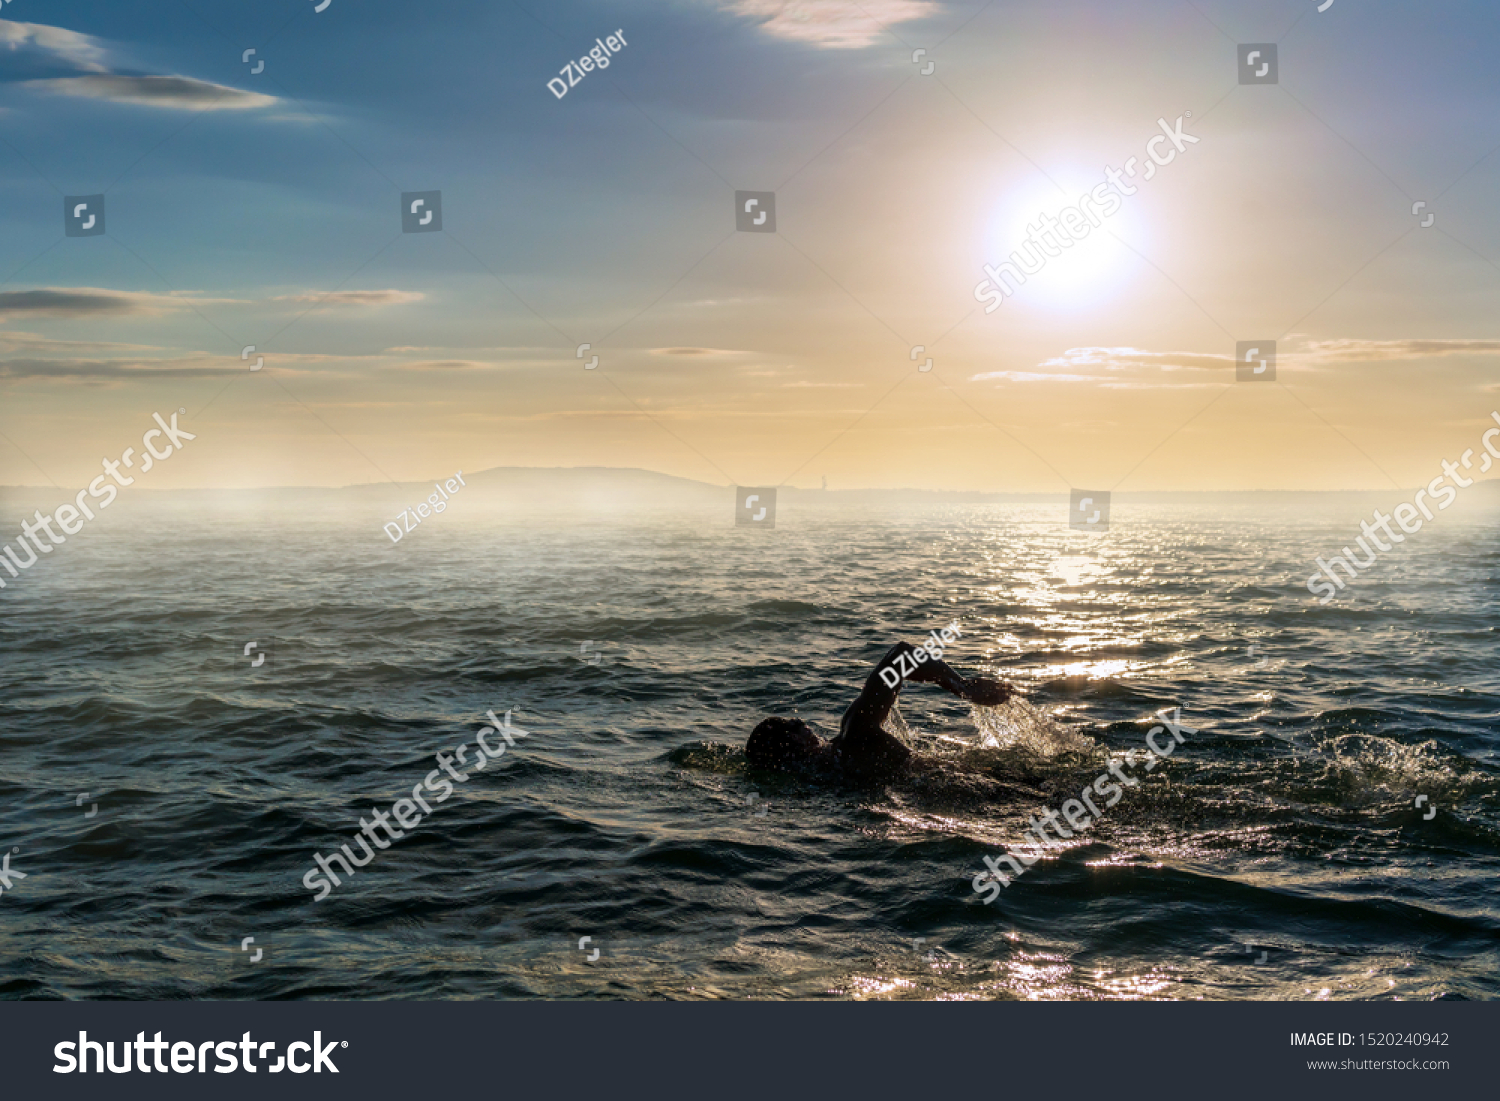 Man swimming in open water during a misty sunset #1520240942